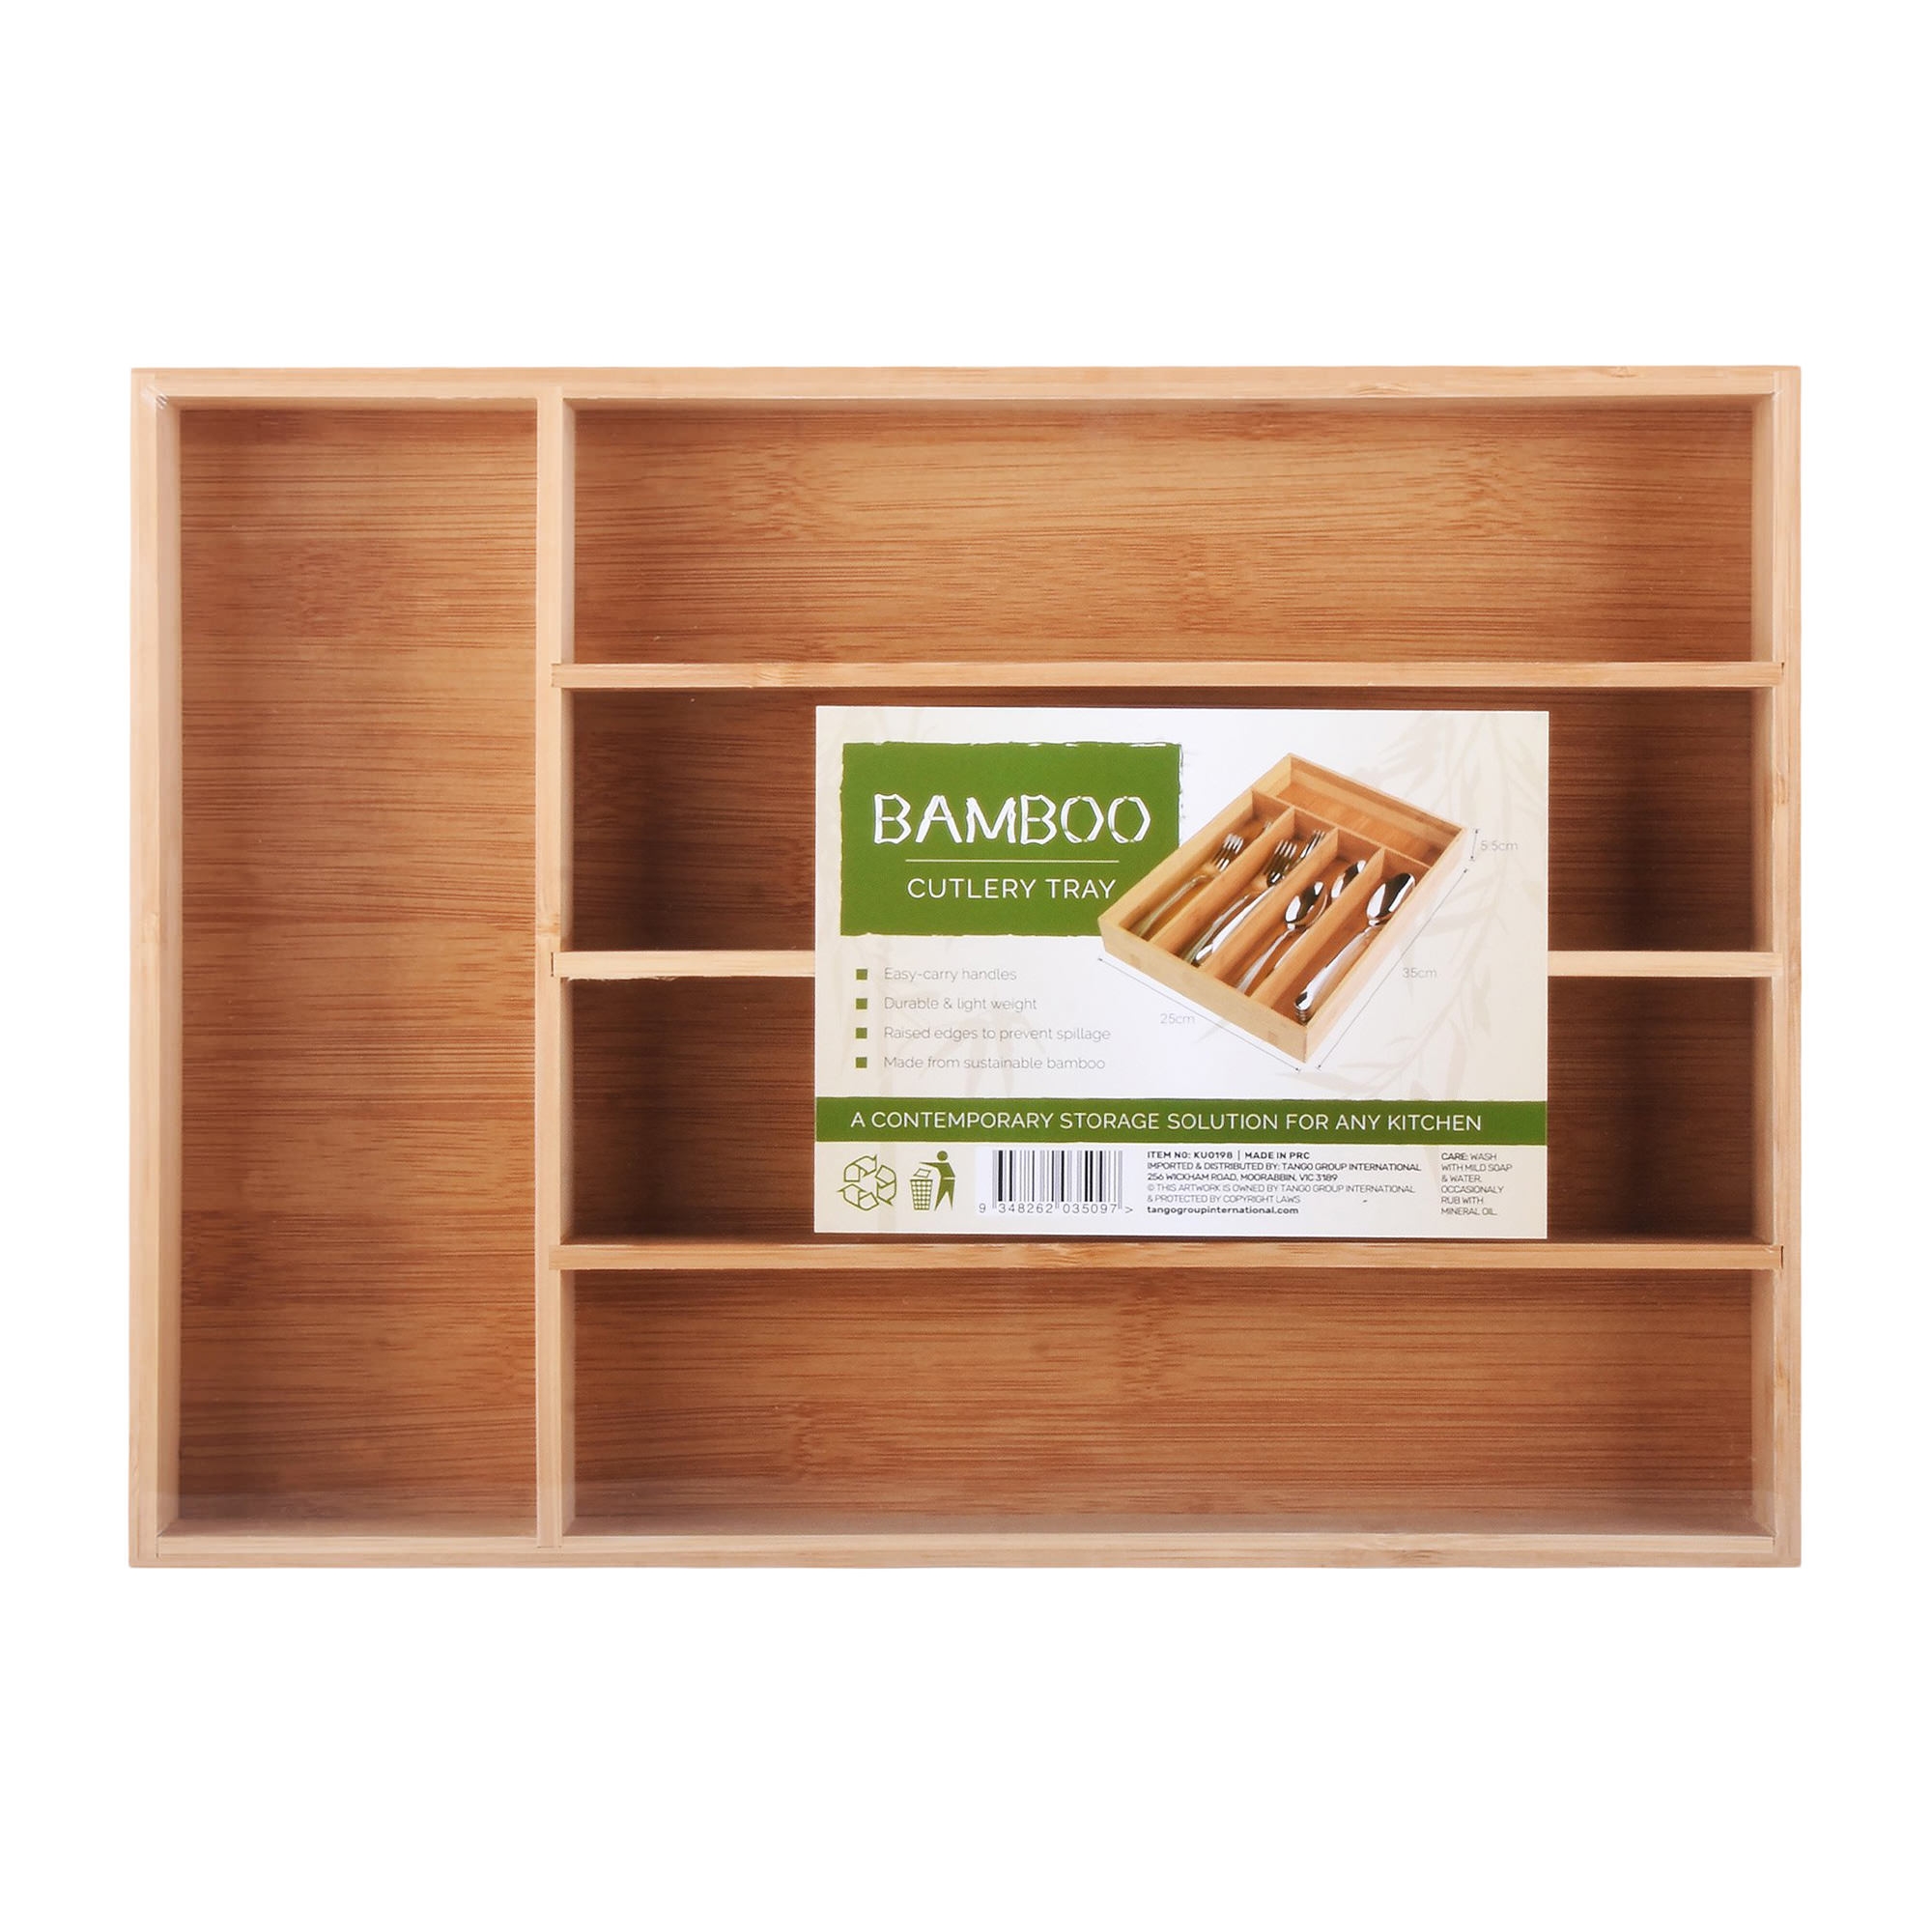 Living Today Bamboo Cutlery Tray 5 Compartment Image 2